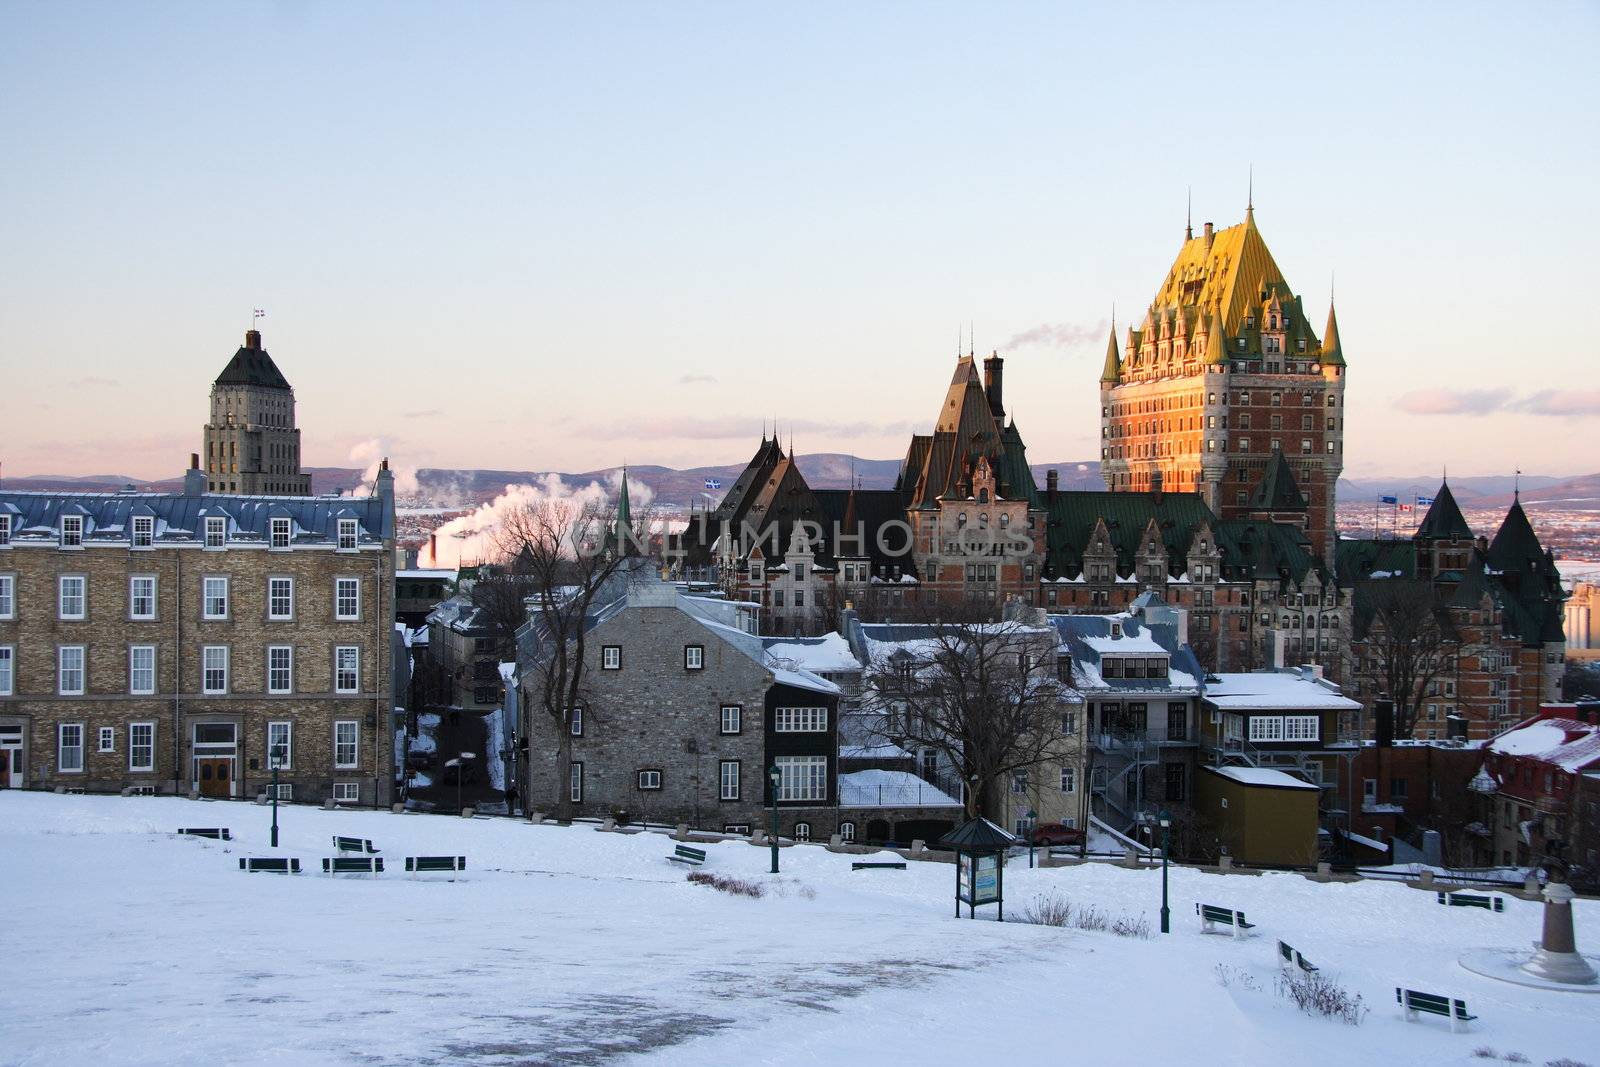 Cityscape of Quebec City showing its most famous landmark, Chateau Frontenac. Winter